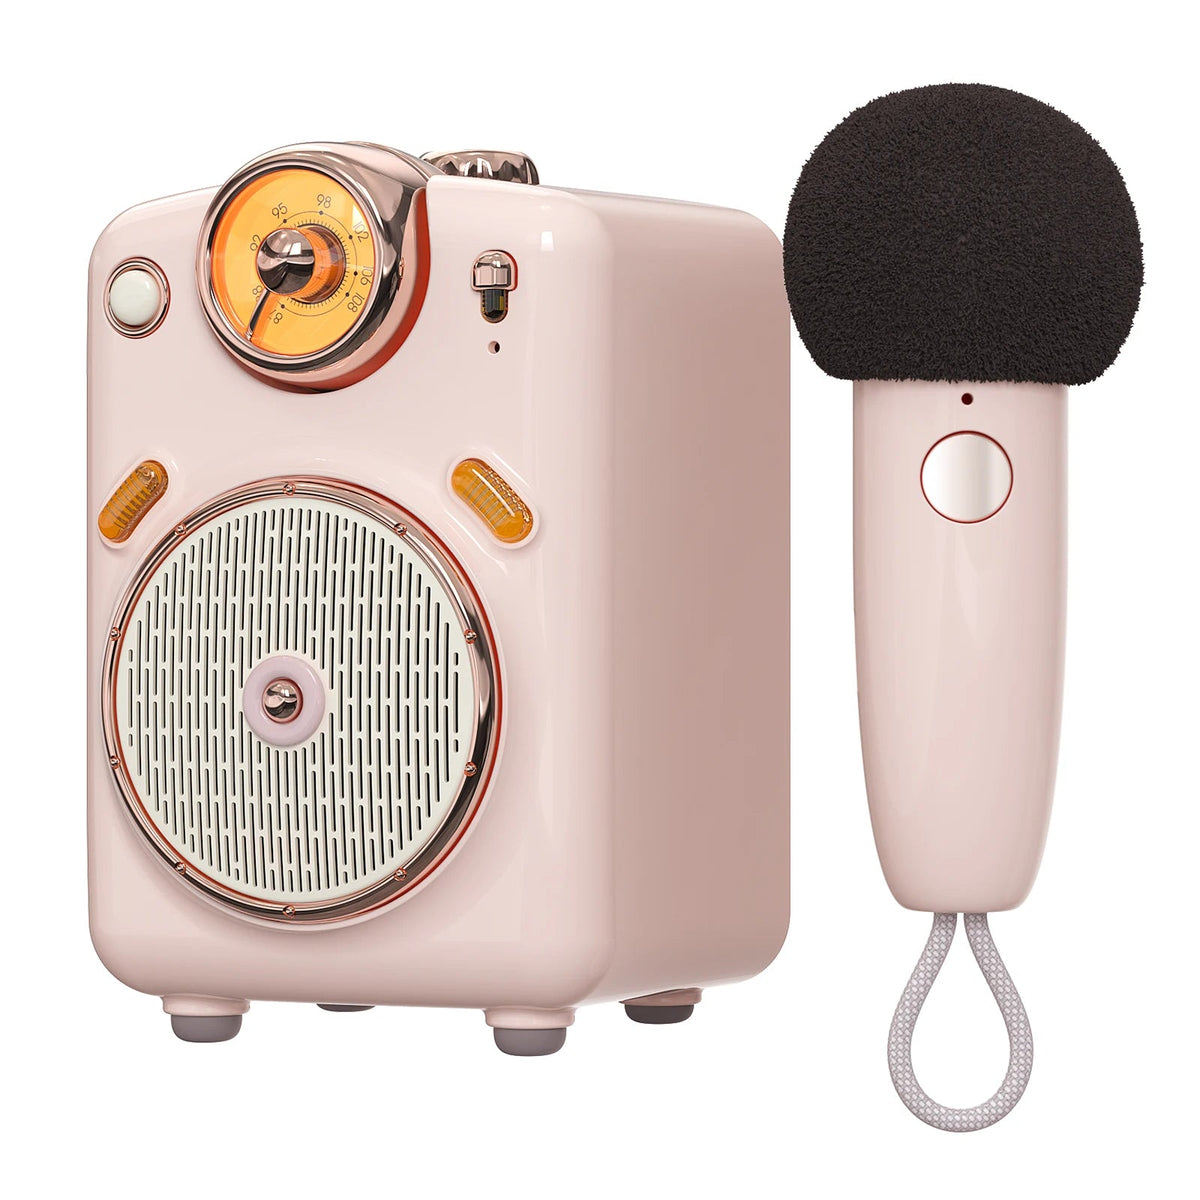 Divoom Fairy-OK Portable Bluetooth Speaker - Microphone Karaoke Function with Voice Change, FM Radio, TF Card Slot Pink / CHINA